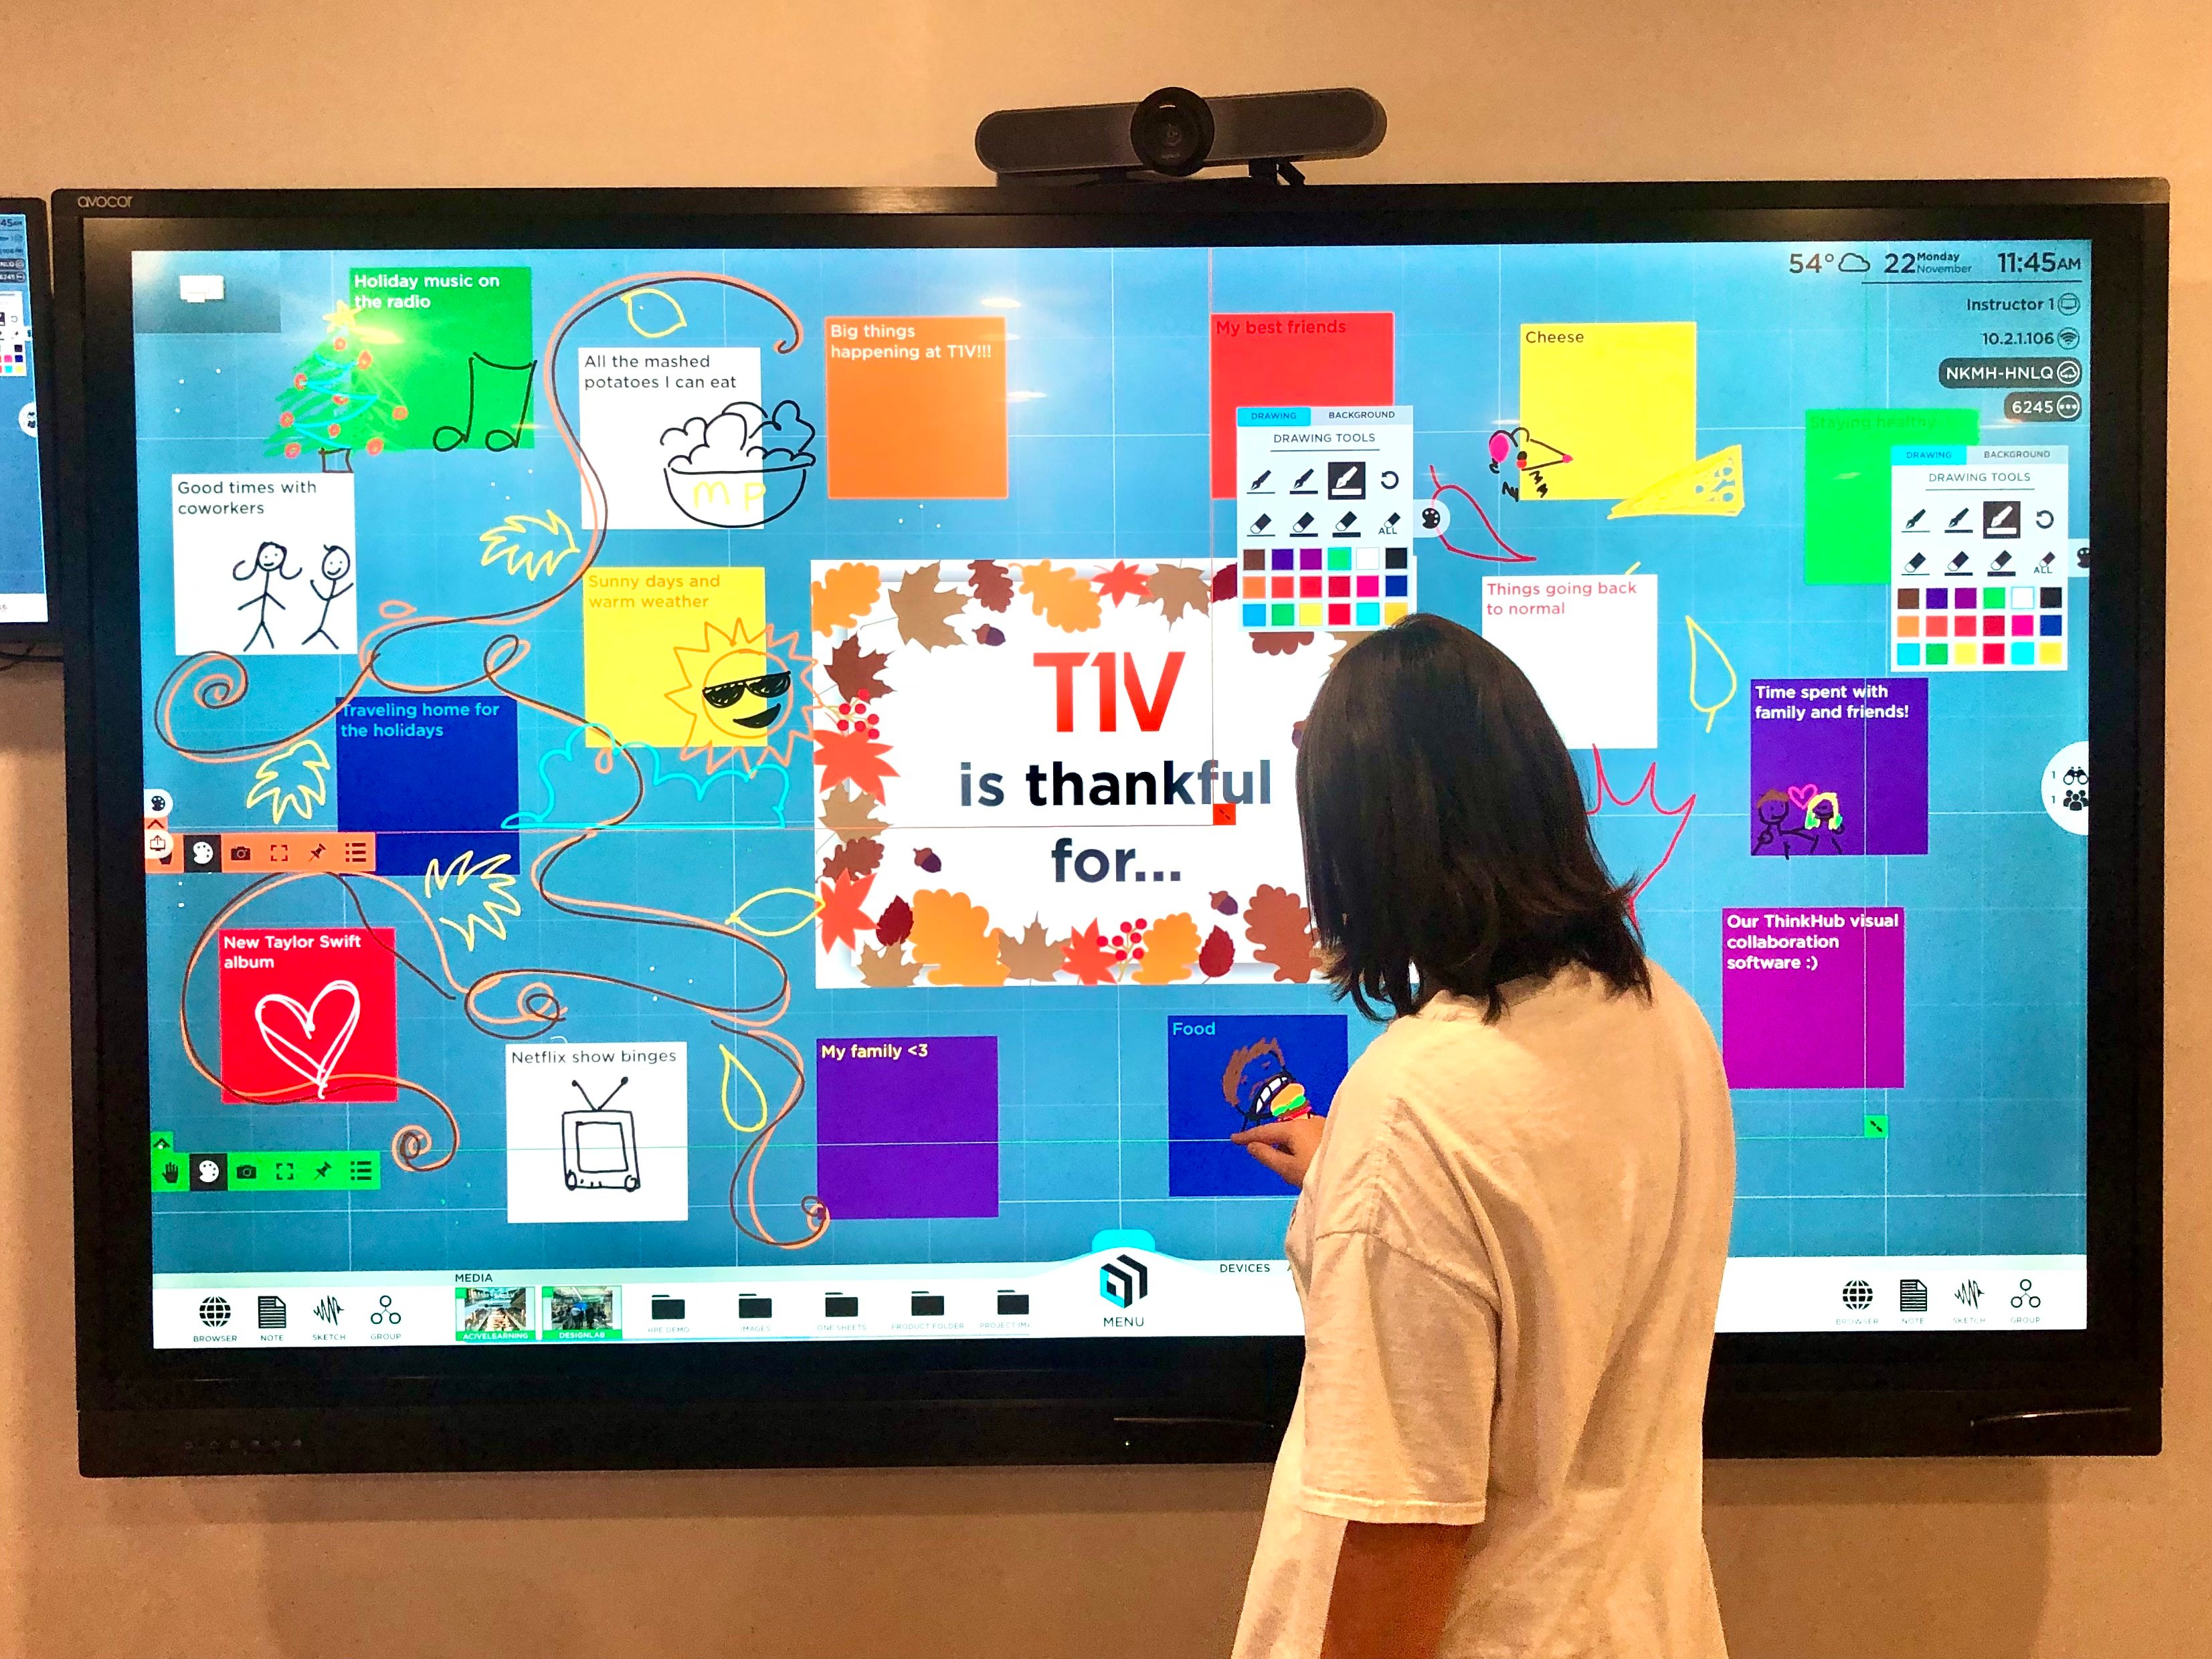 t1v-is-thankful-for-thanksgiviing-annotating-on-thinkhub-canvas